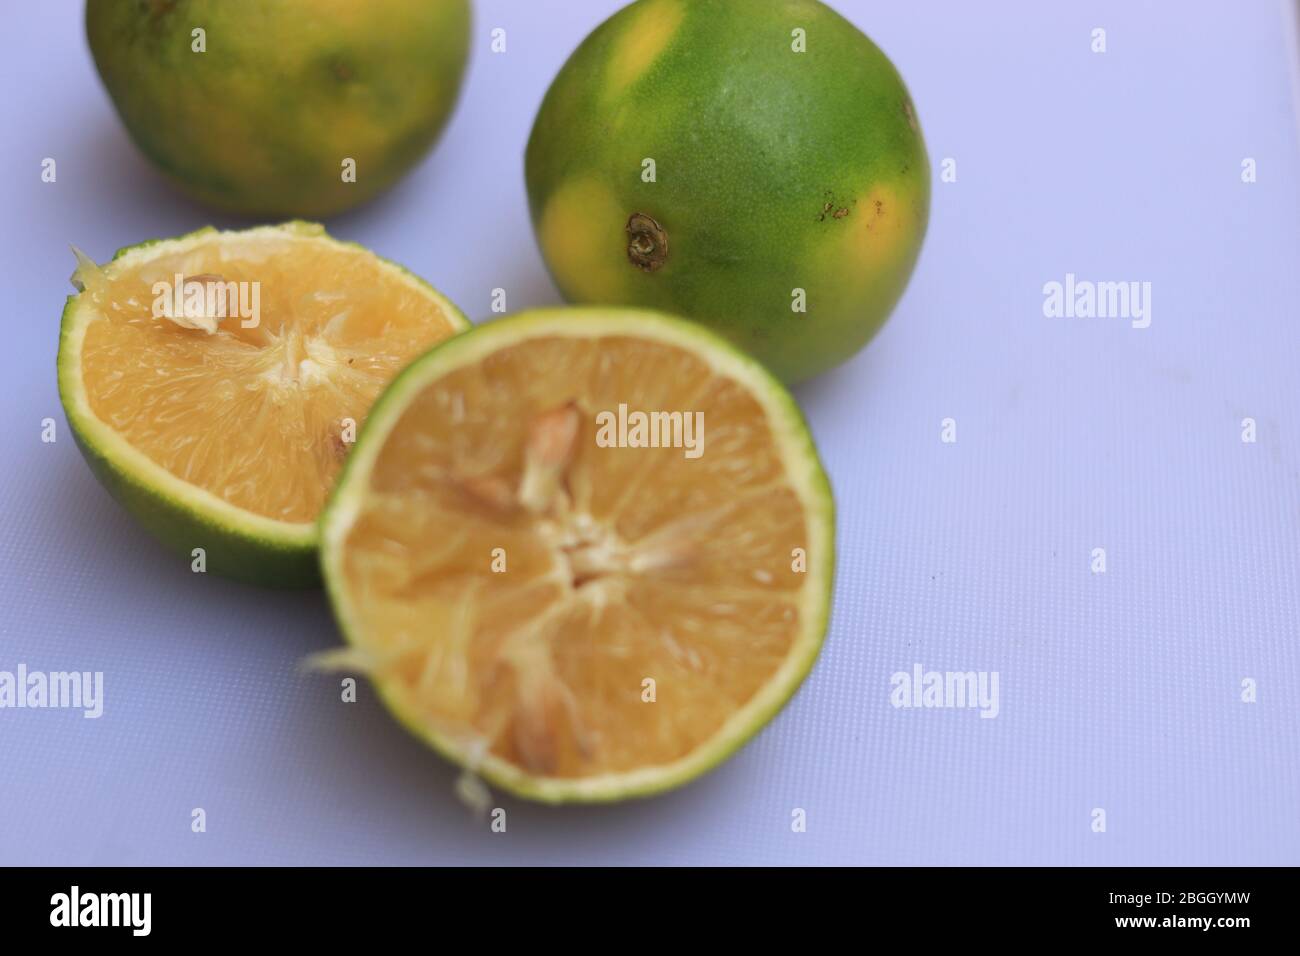 Yellow and green color whole ripe Sweet lime fruits or Citrus limetta Stock Photo